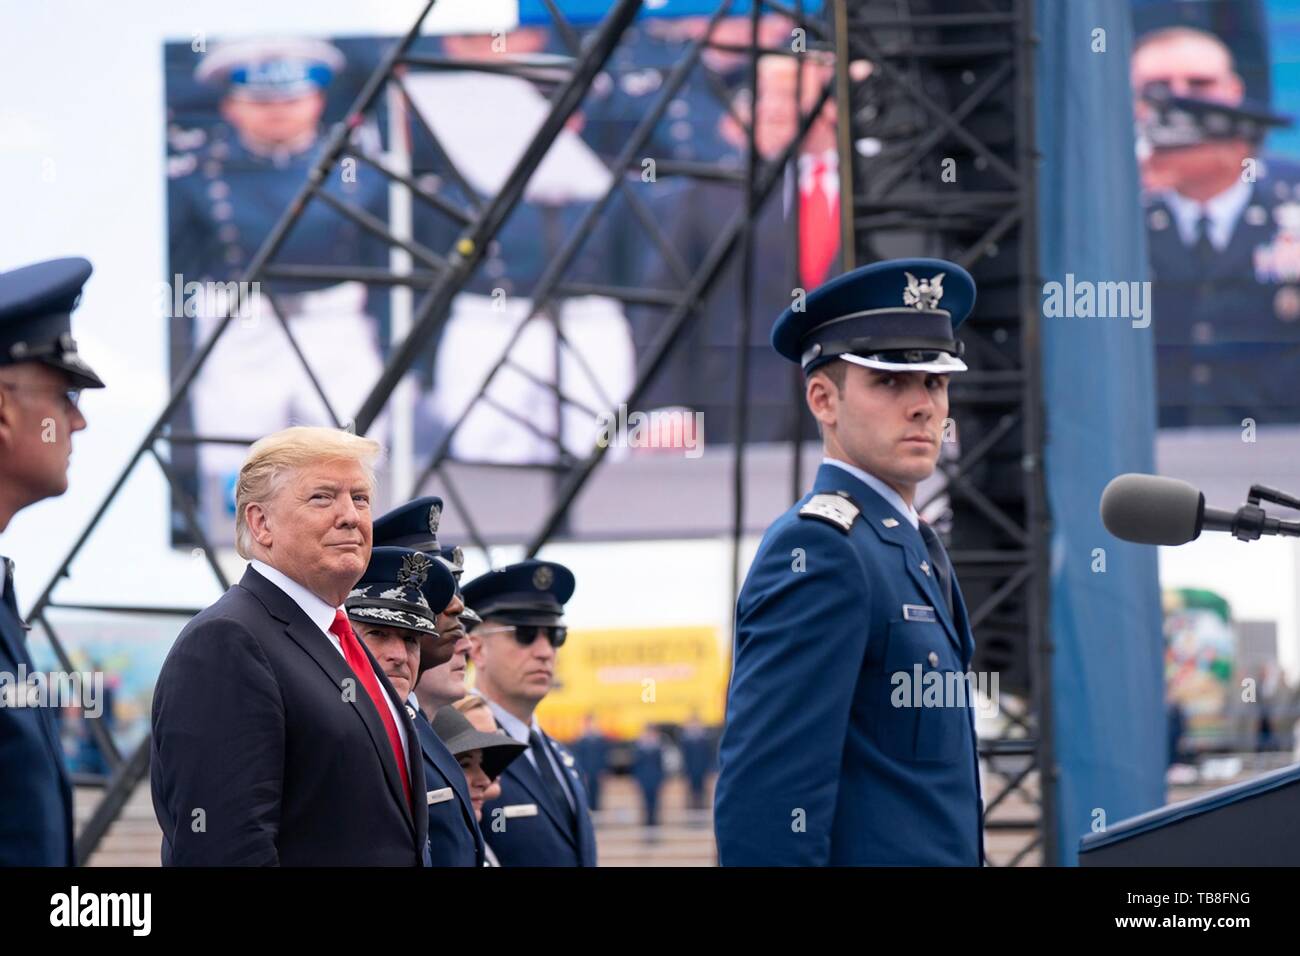 U.S President Donald Trump during the U.S. Air Force Academy Graduation Ceremony at the USAF Academy Falcon Stadium May 30, 2019 in Colorado Springs, Colorado. Credit: Planetpix/Alamy Live News Stock Photo